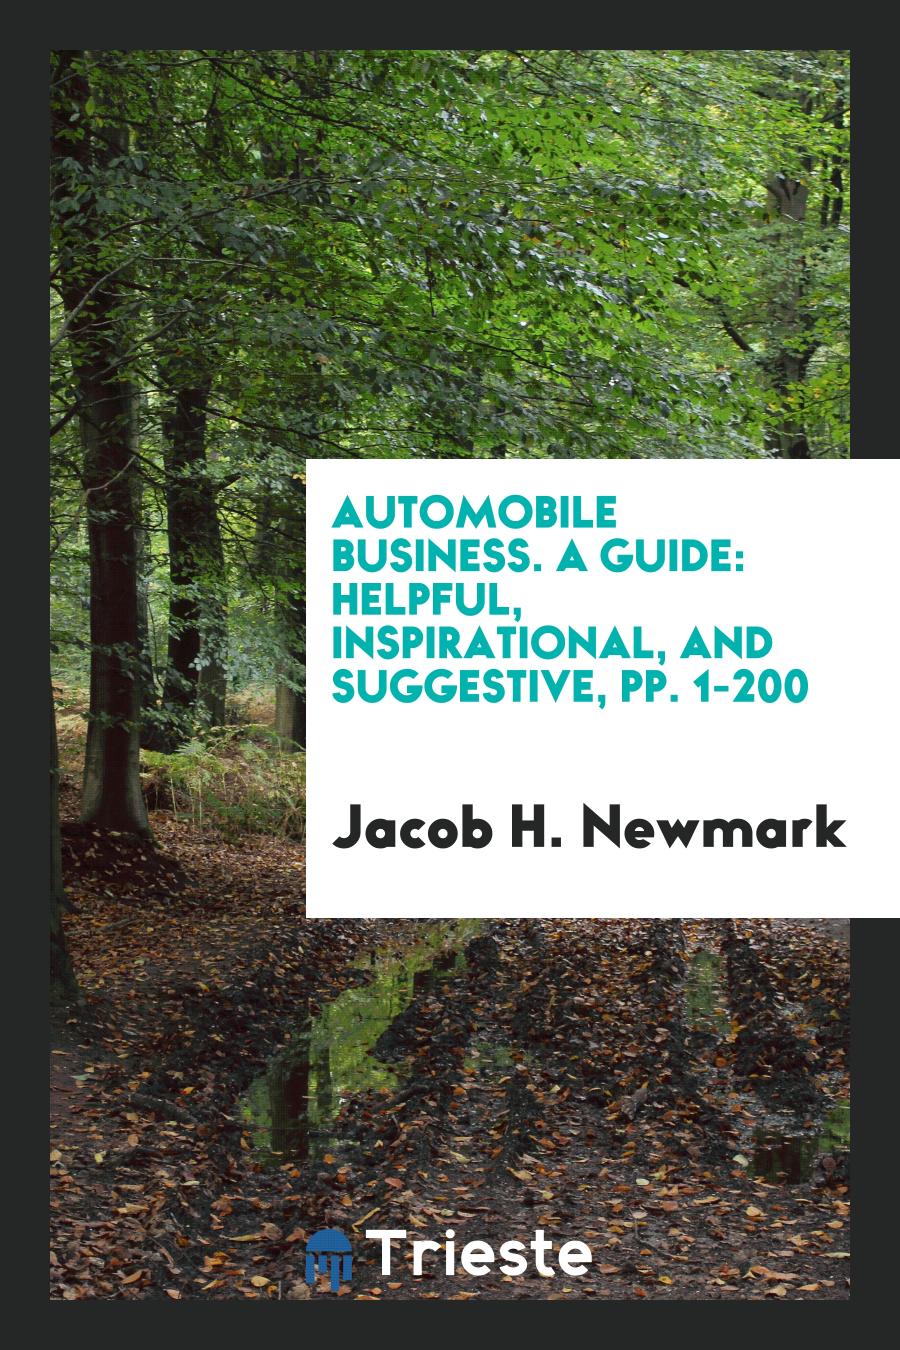 Automobile Business. A Guide: Helpful, Inspirational, and Suggestive, pp. 1-200